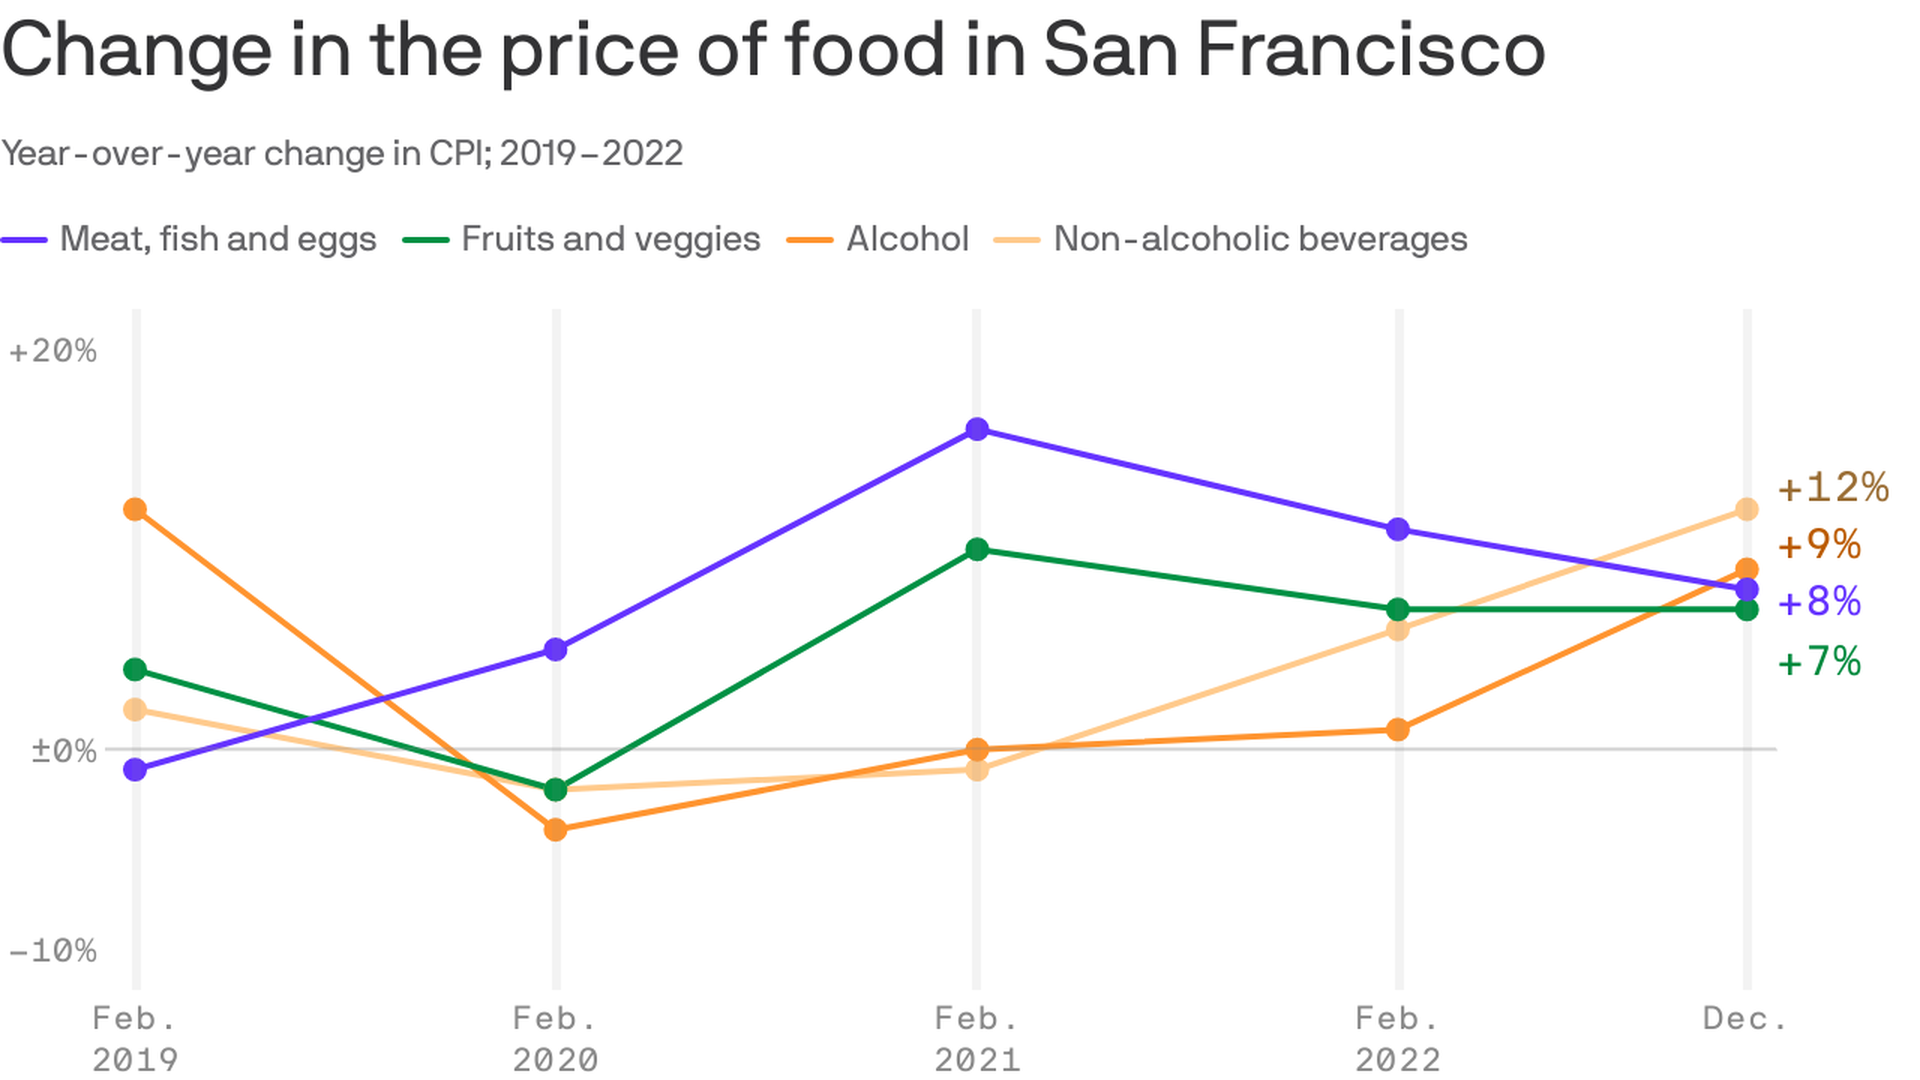 Change in price of food in various categories, February 2019 to present